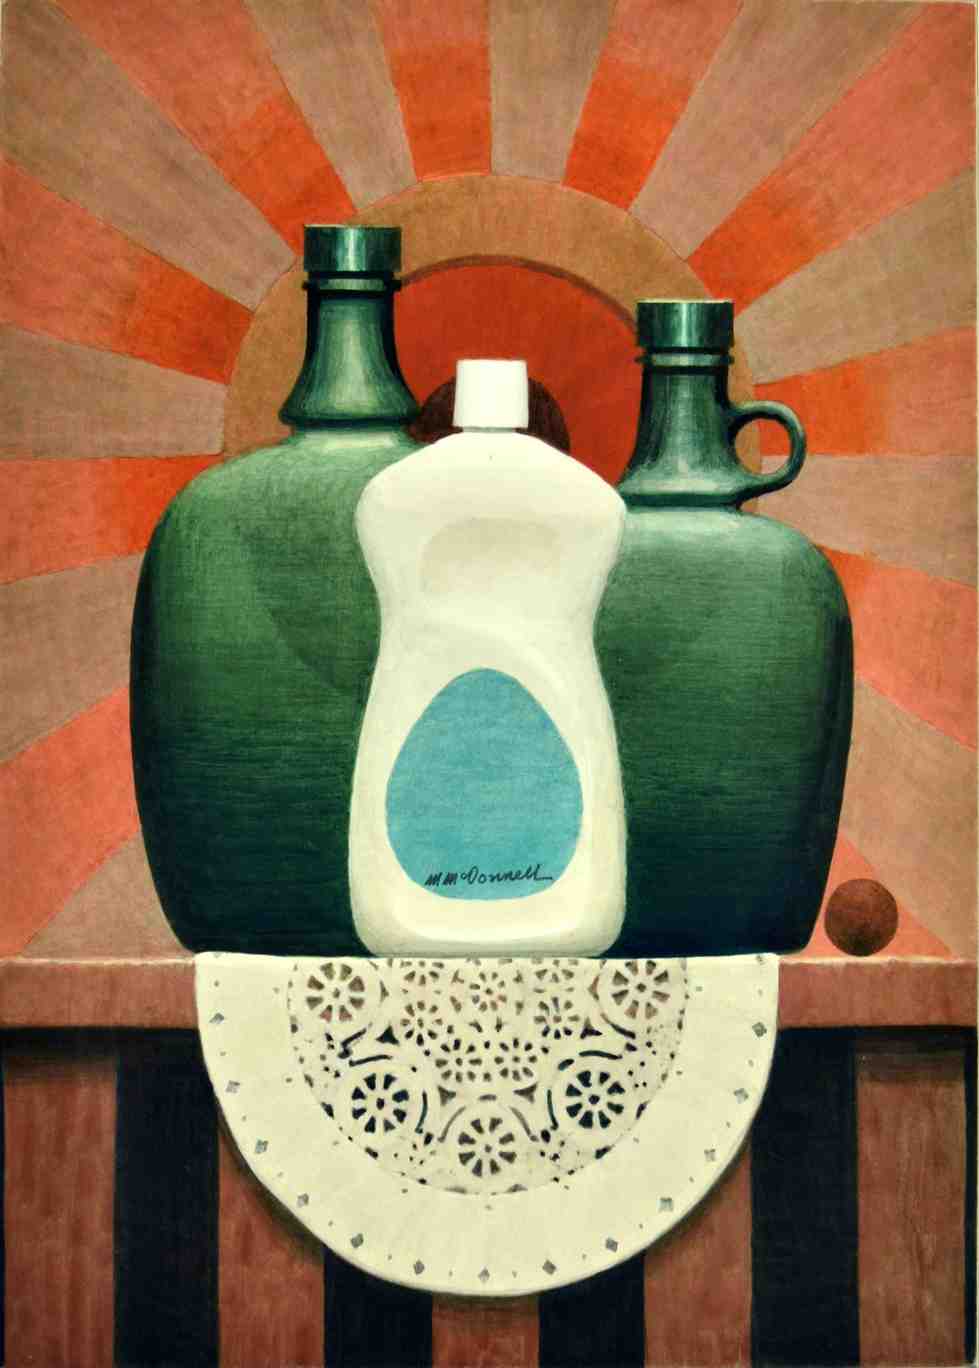 Still Life of cleaning bottle and two jugs